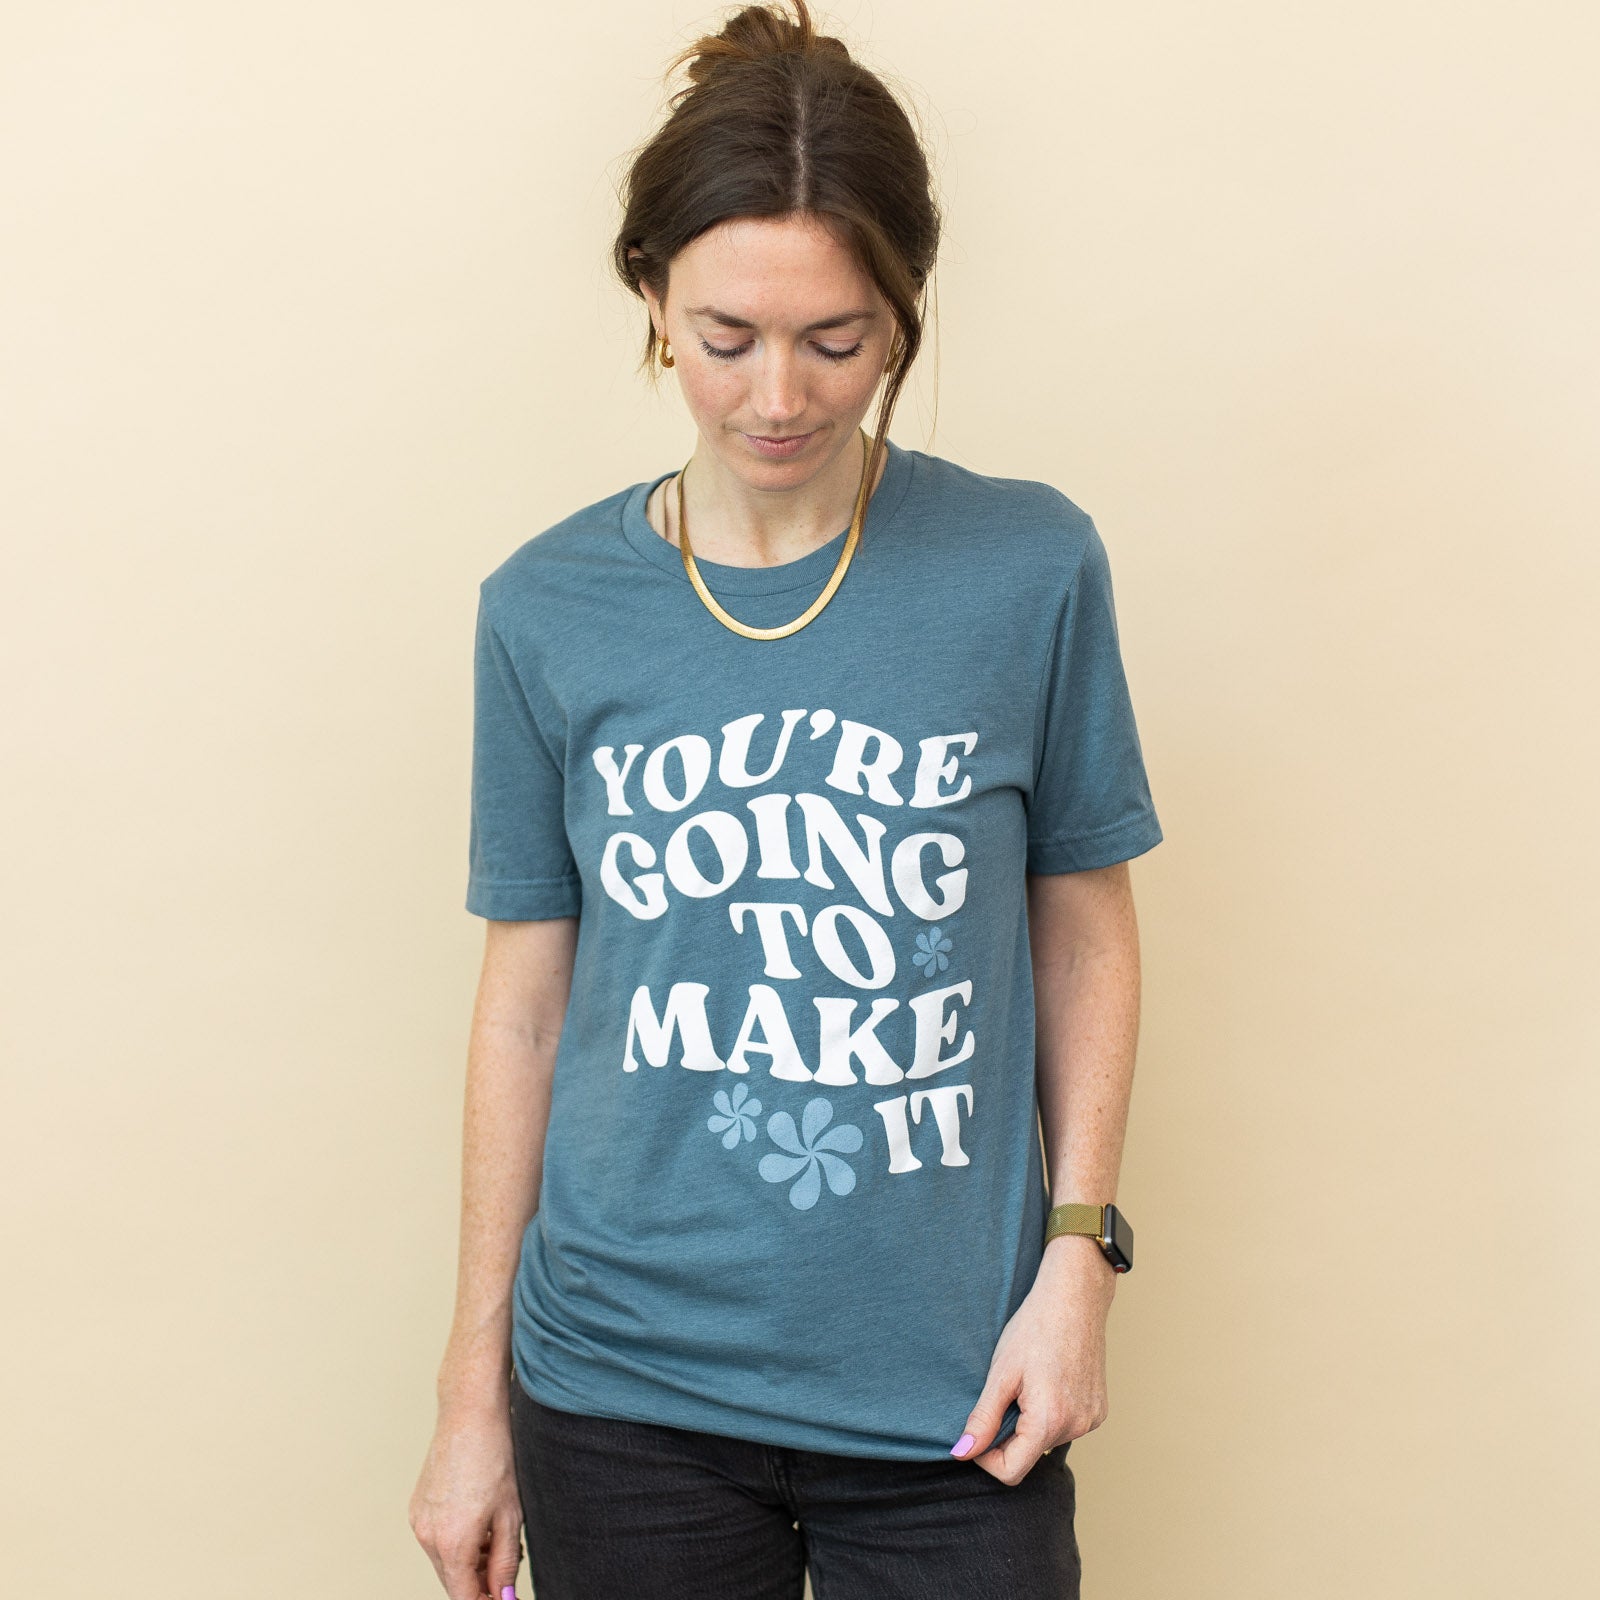 You're Going to Make It T-Shirt